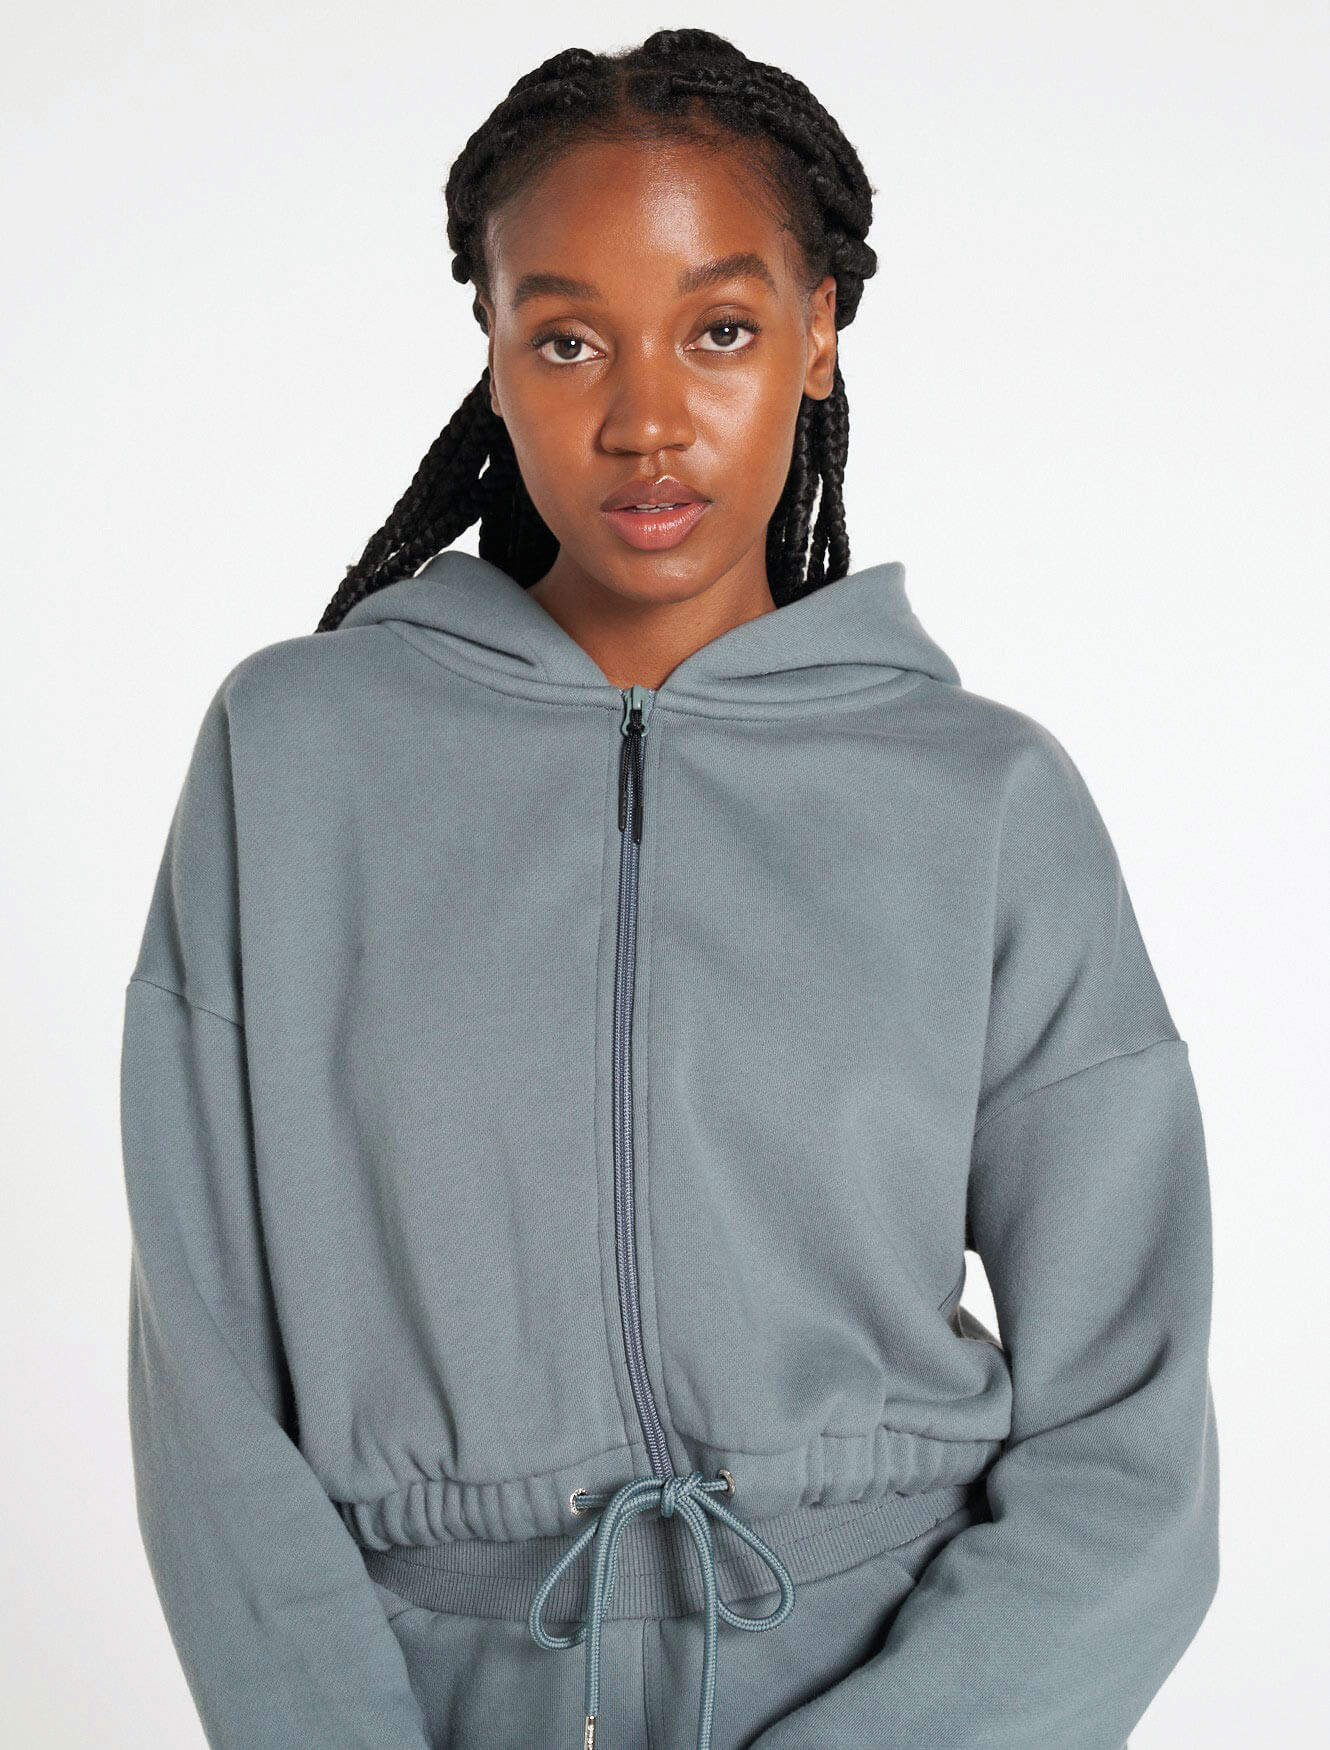 Select Crop Jacket / Teal Pursue Fitness 3